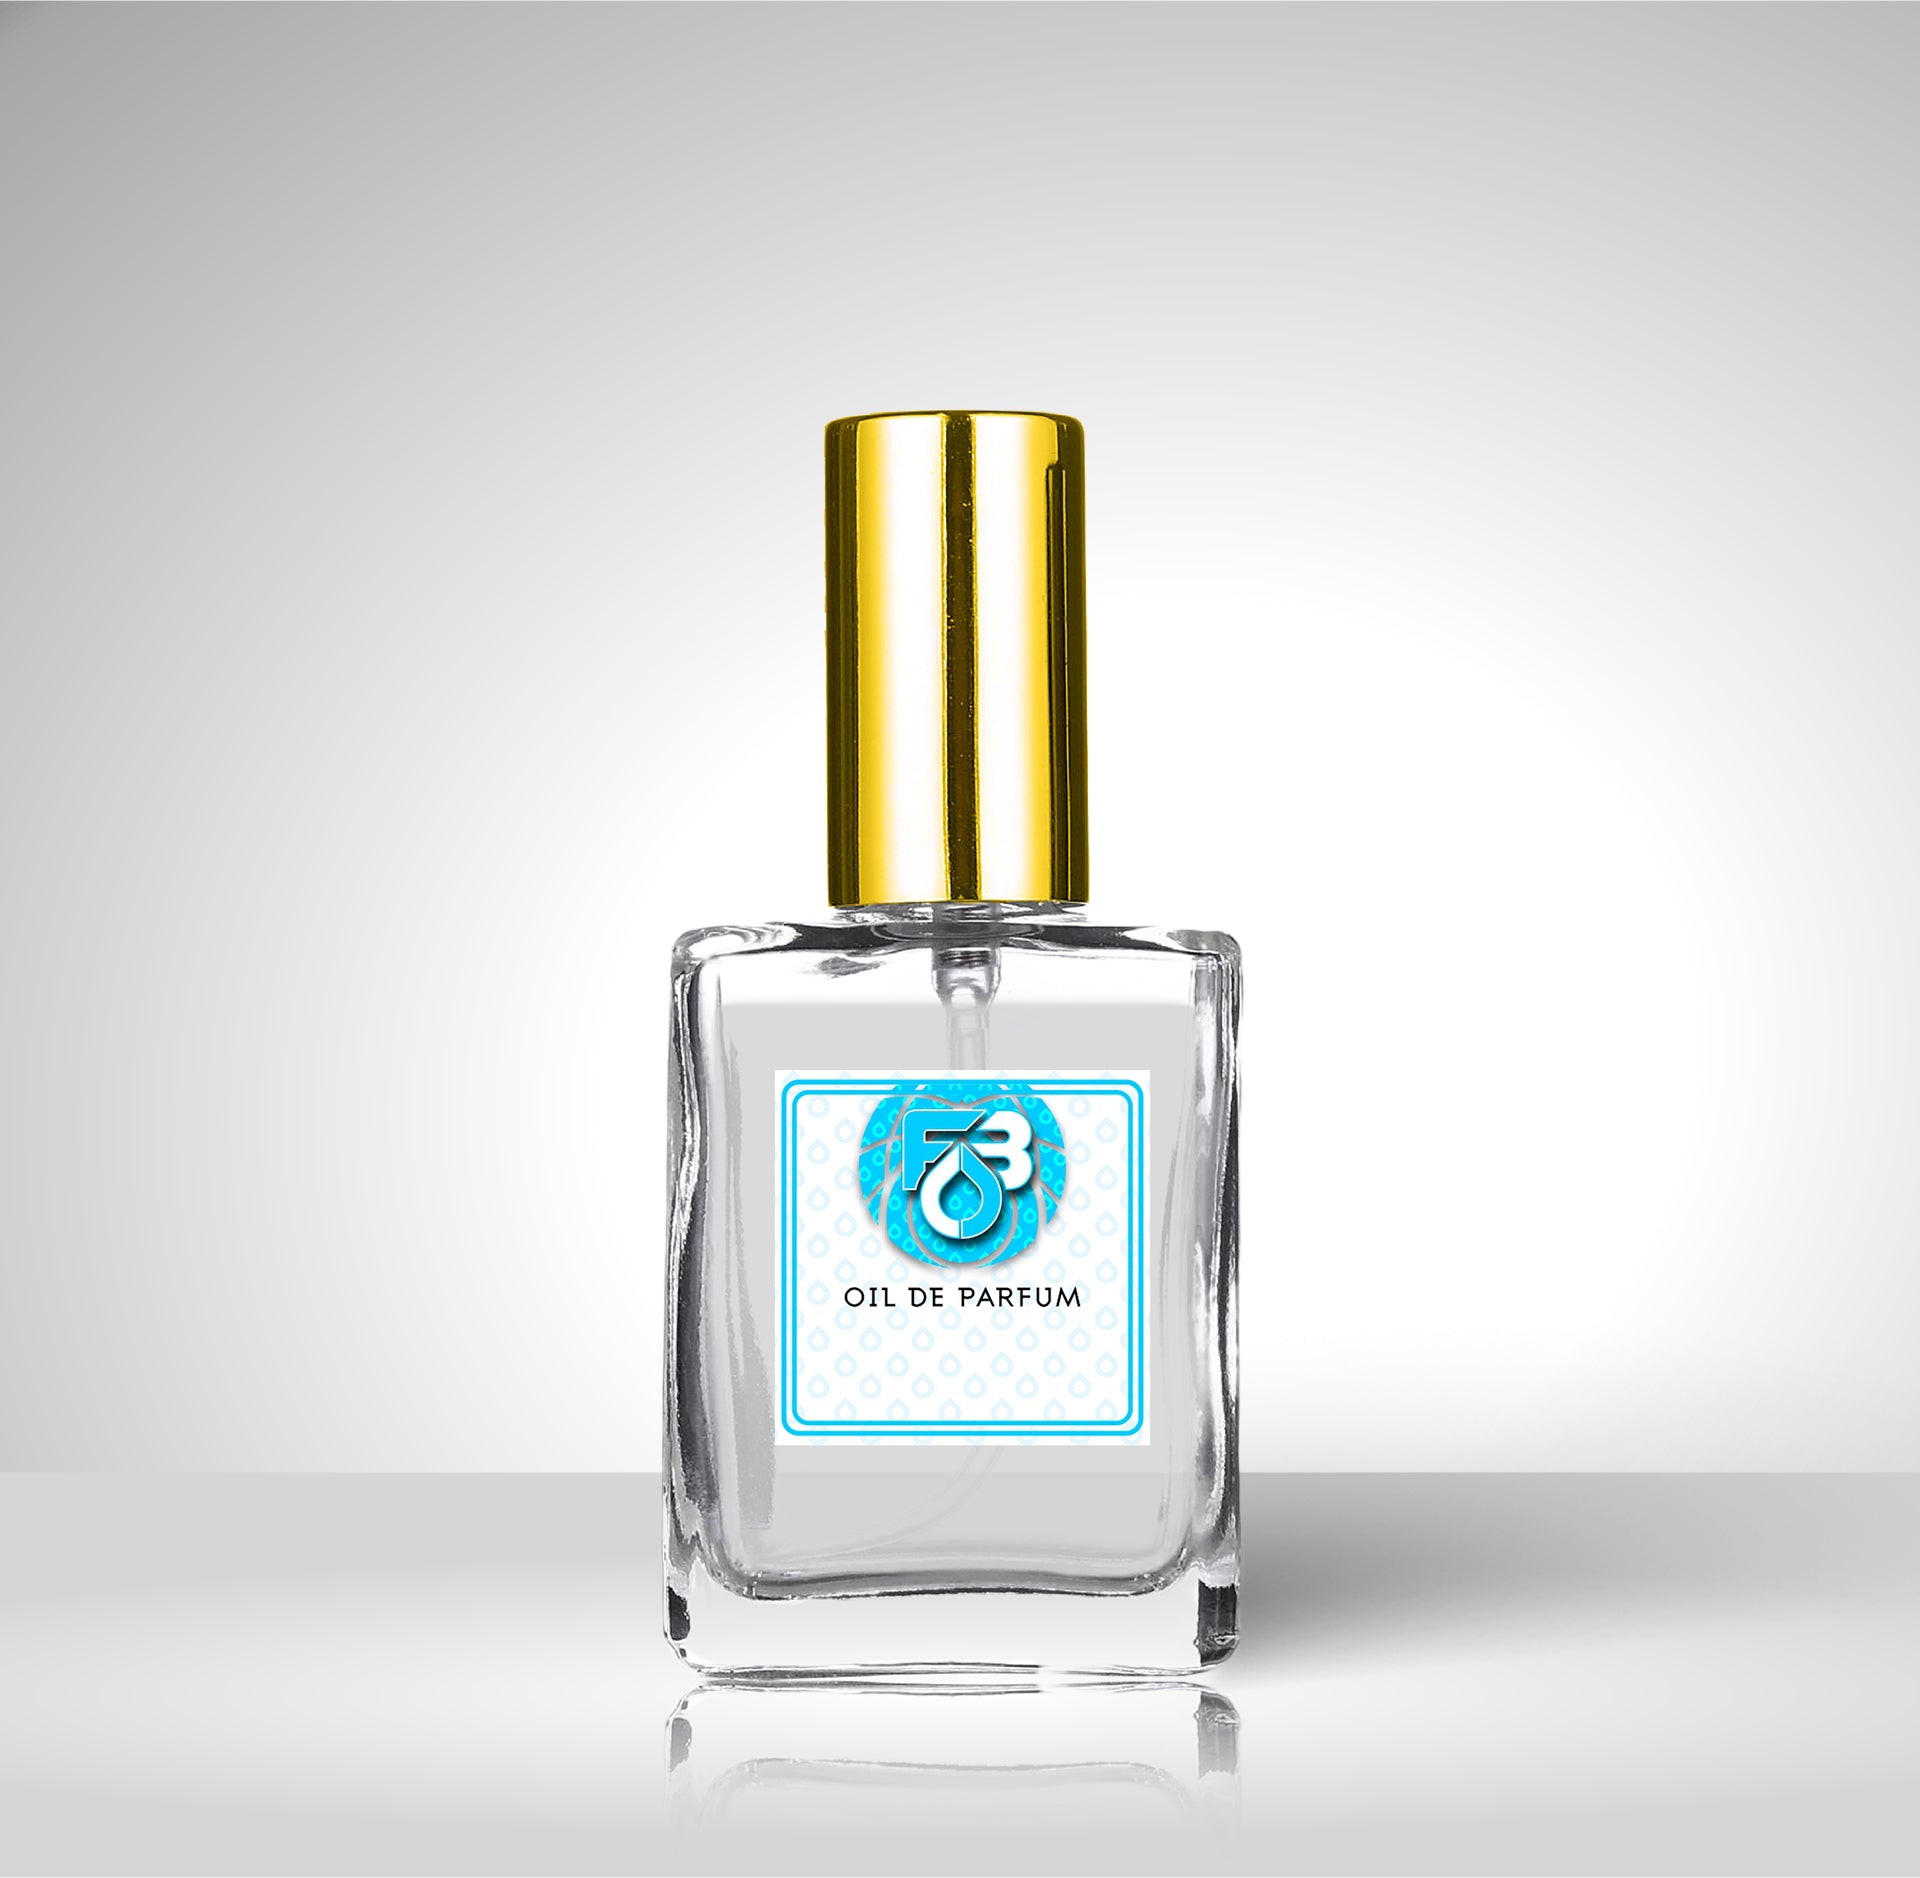 Compare Aroma to Jimmy Choo Man®